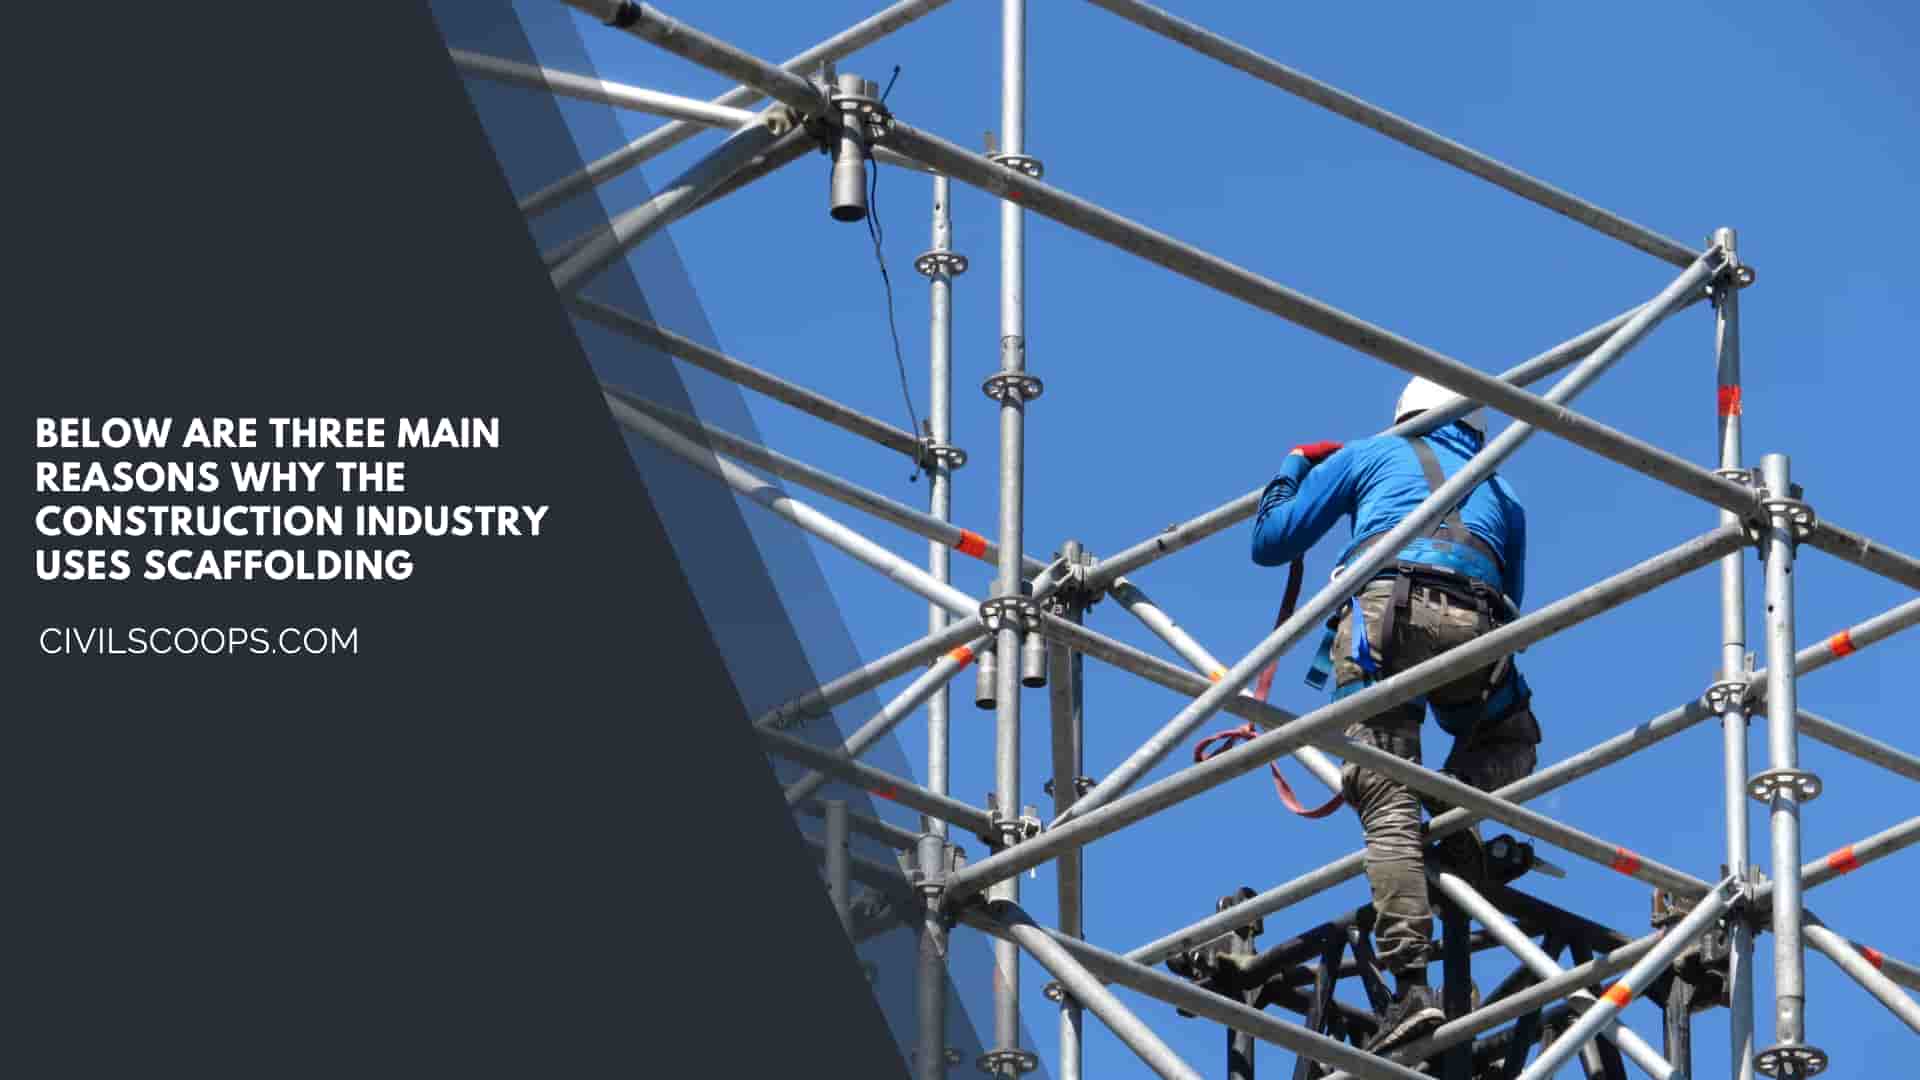 Below Are Three Main Reasons Why the Construction Industry Uses Scaffolding